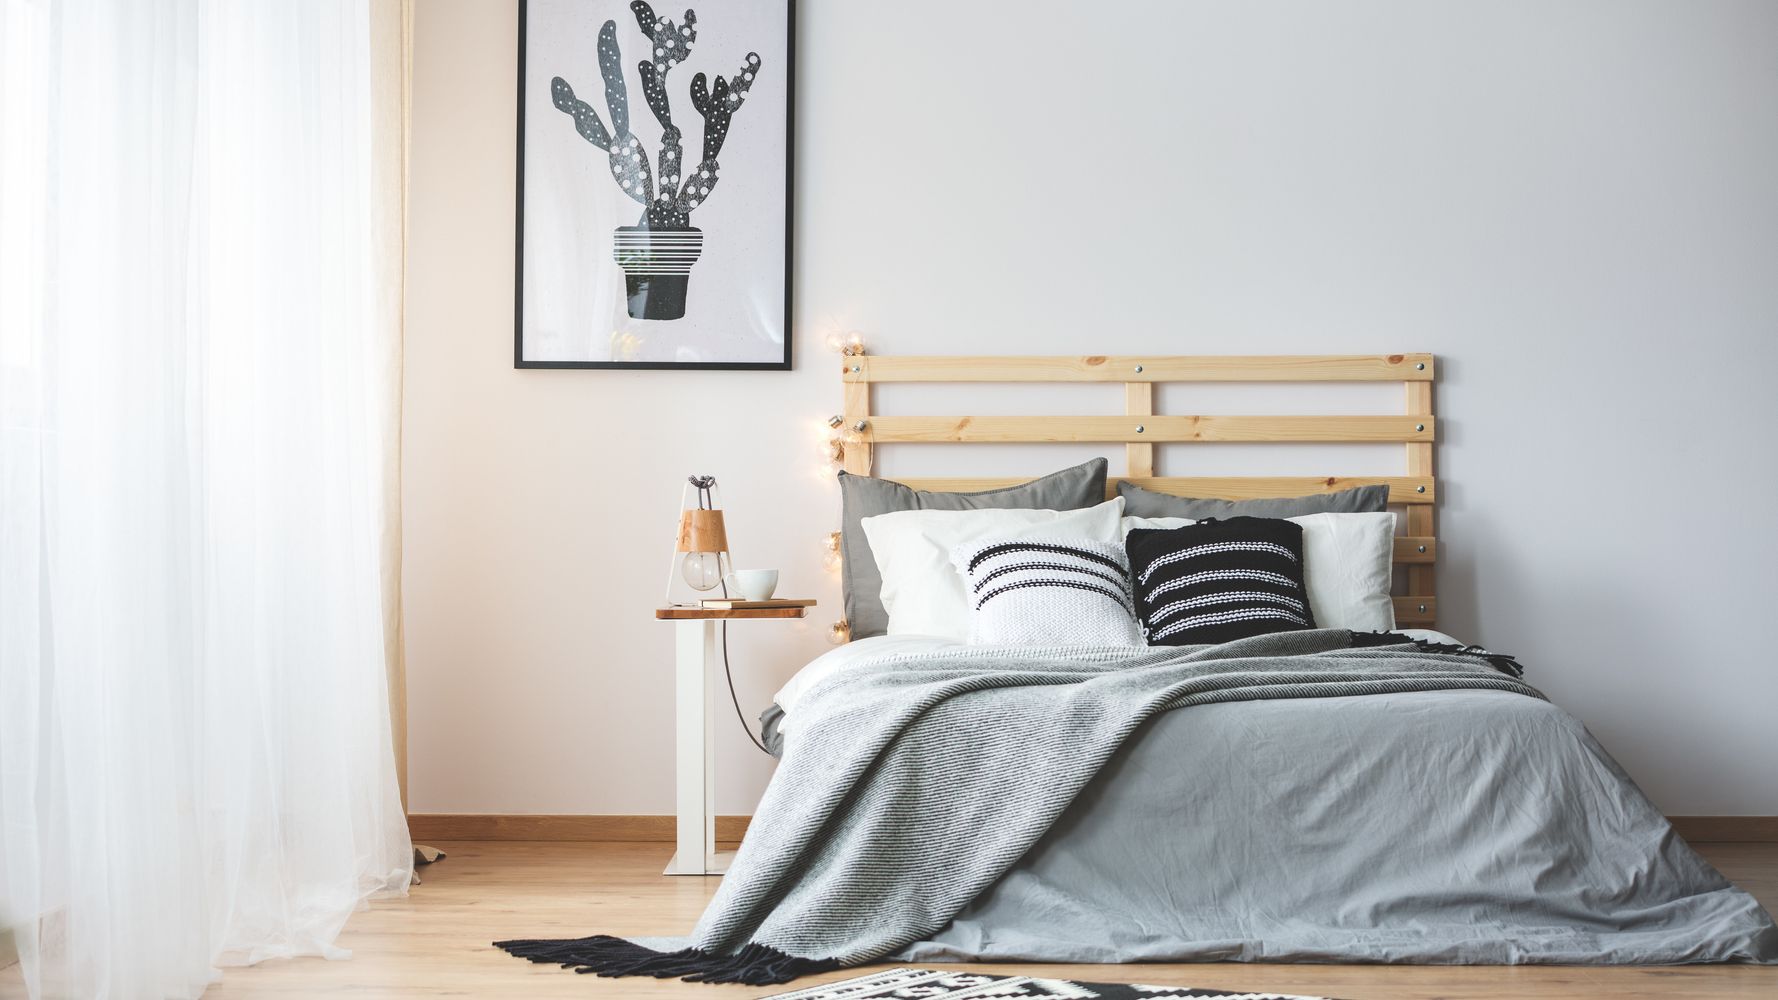 10 Minimalist Bedroom Essentials According To An Etsy Expert